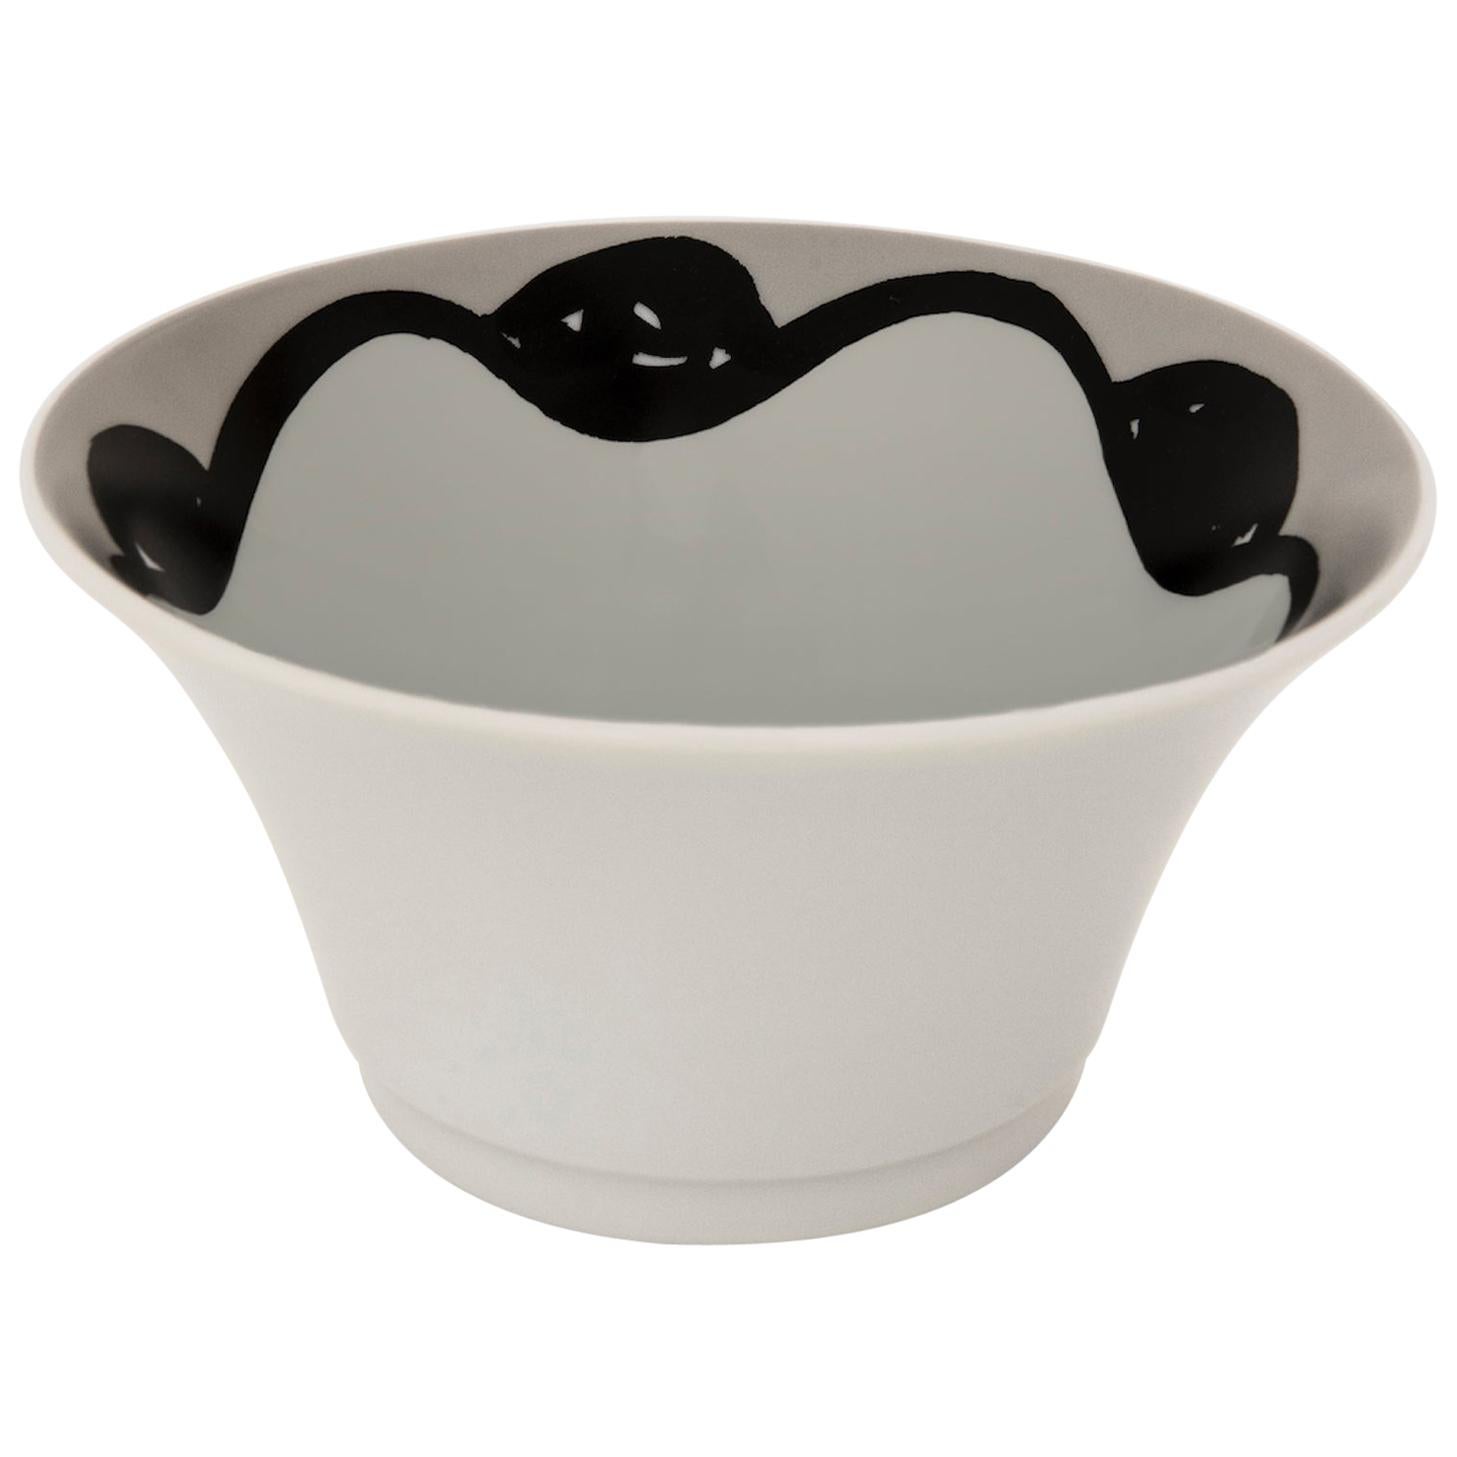 Black White Gray French Limoges Porcelain Deep Bowl, Exclusive Edition